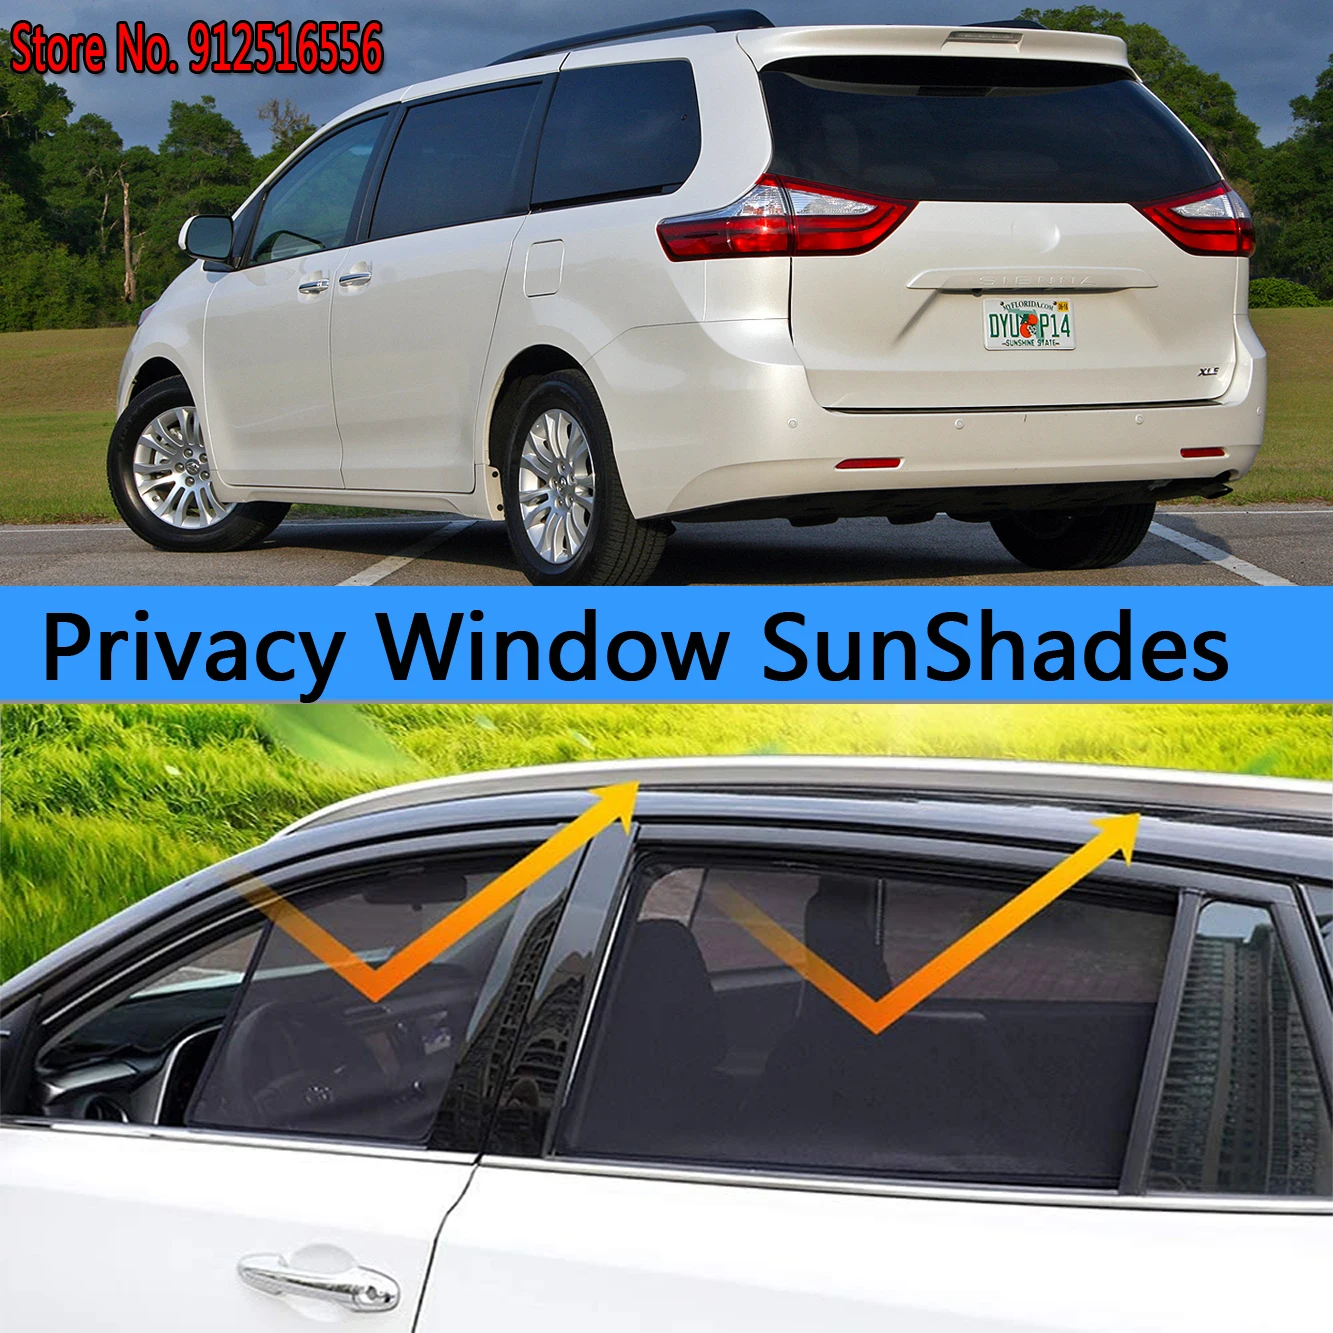 

Side Sun Shade Shading Protection Window SunShades Sunshield Accseeories For Toyota Sienna XLE SE XL30 30 2011-2020 2013 2014